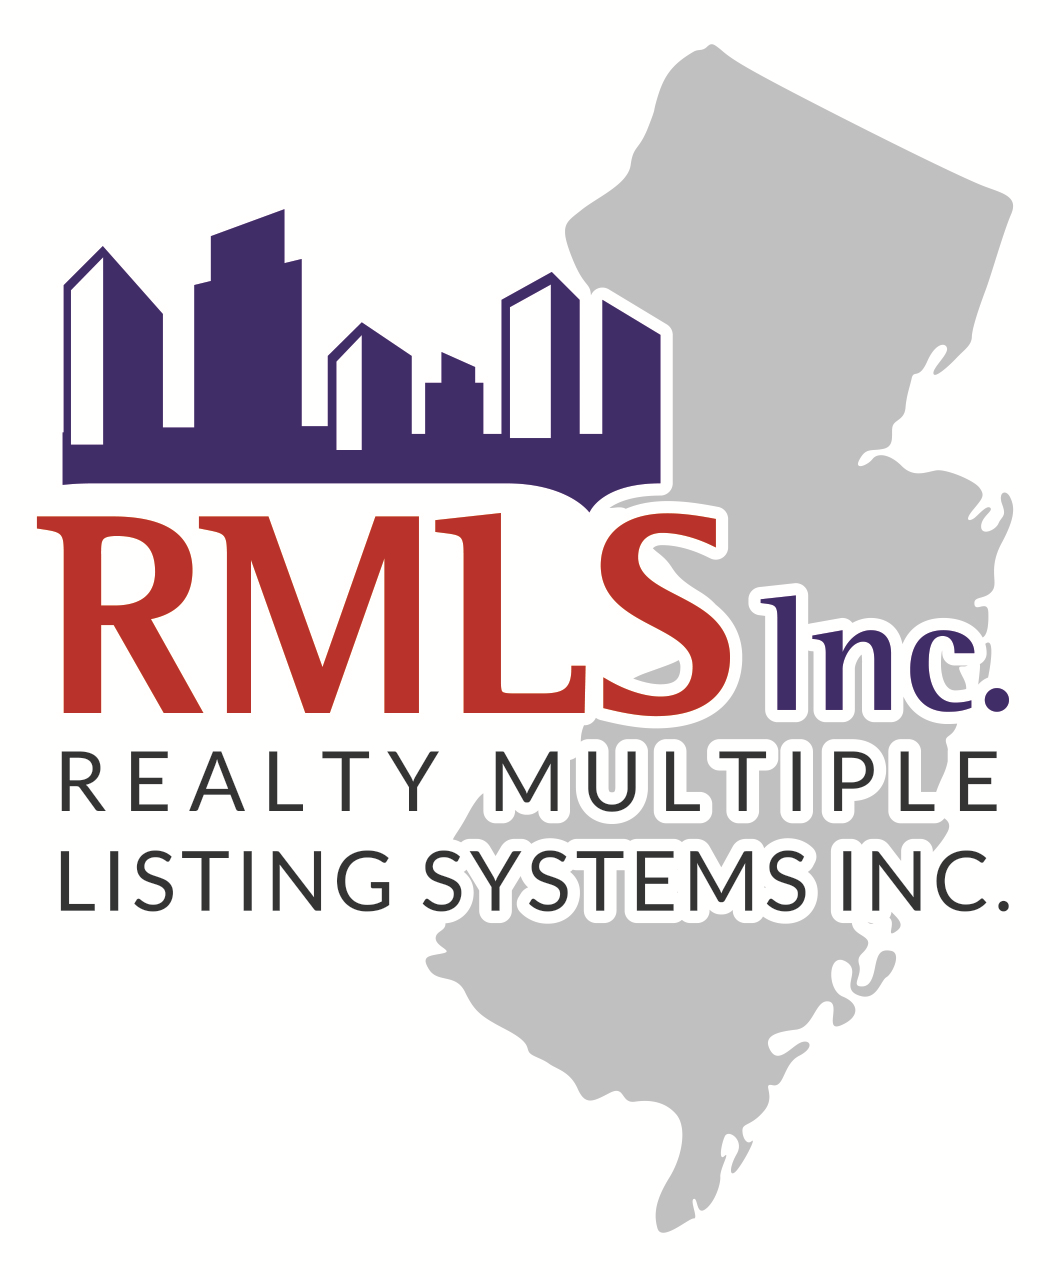 www.rmlsnj.com: Contact broker about this listing